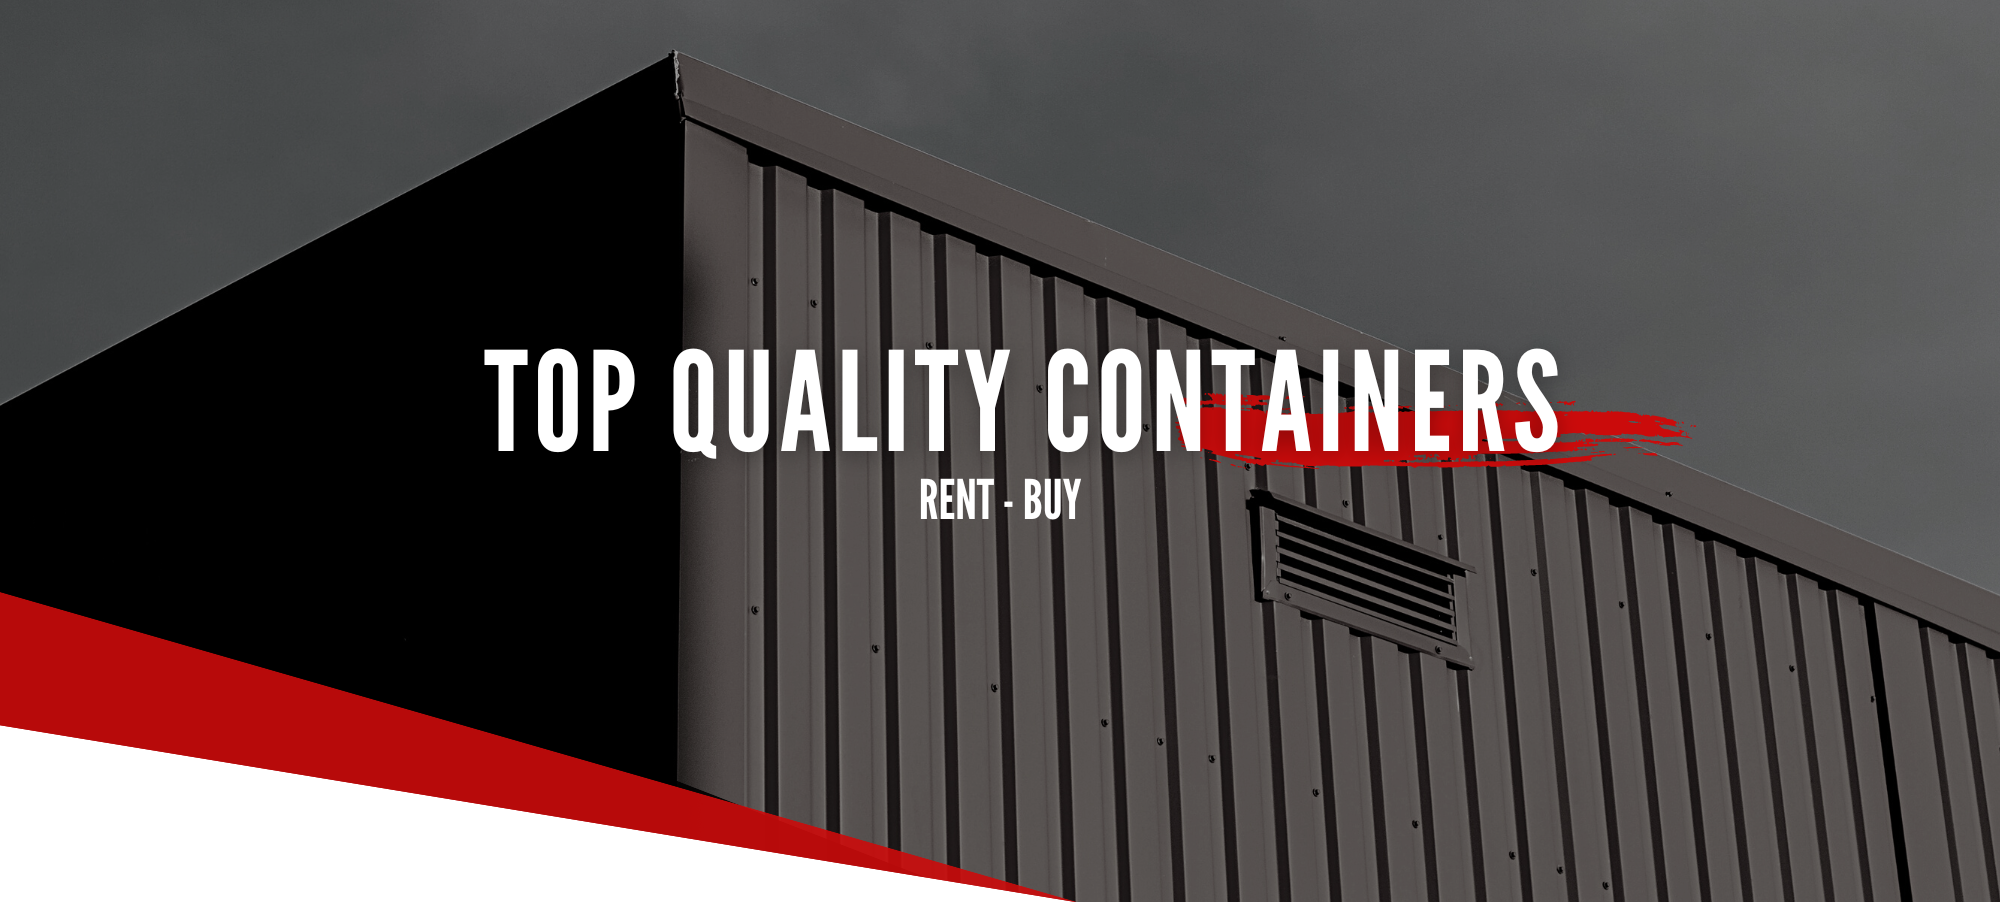 top quality Container graphic 